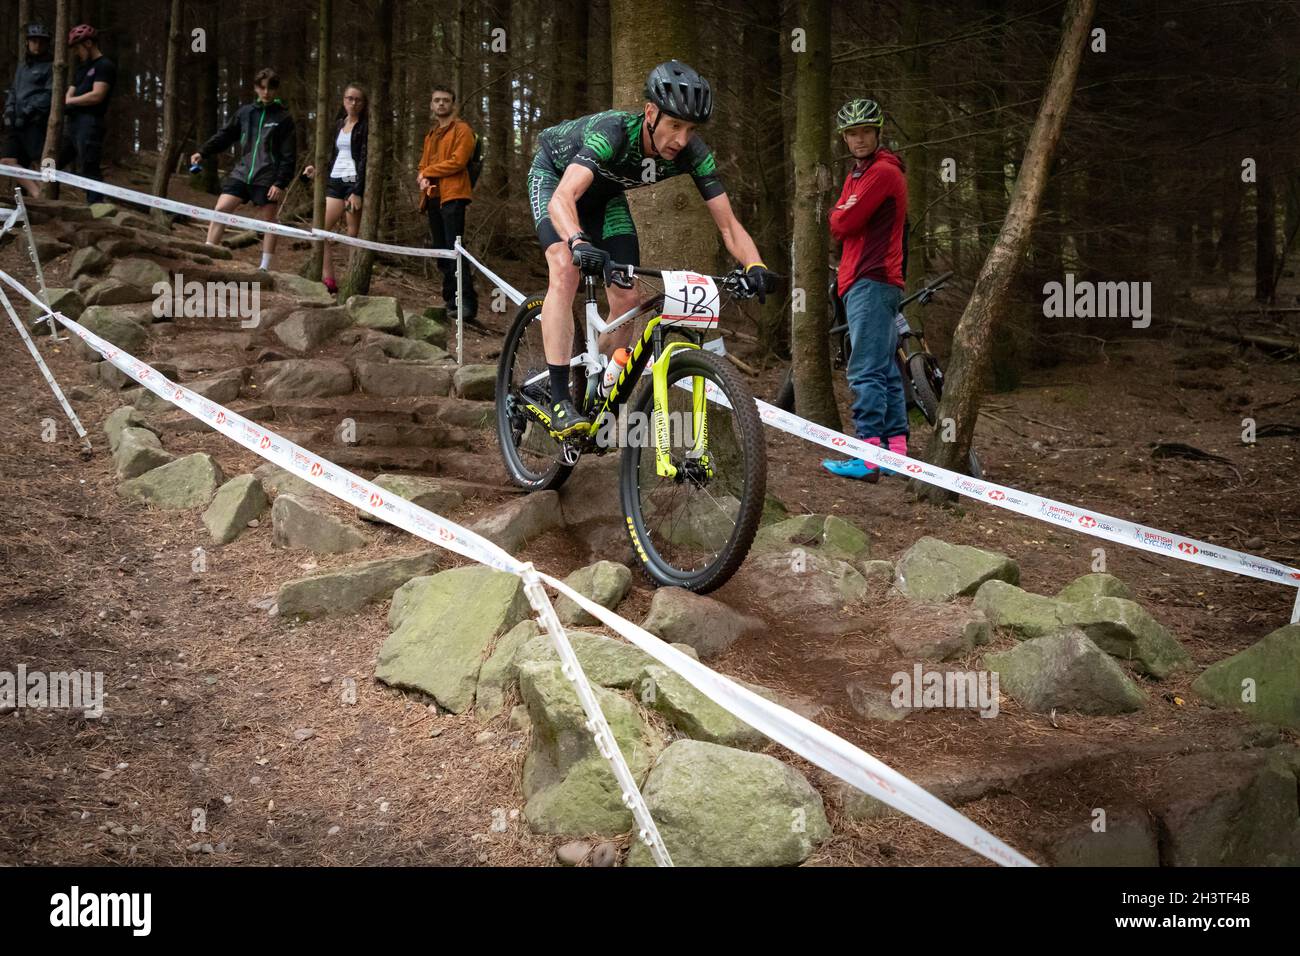 Mountain bike racers in national points series race, Cannock Chase, Staffordshire, England, UK, GB, Europe. Stock Photo